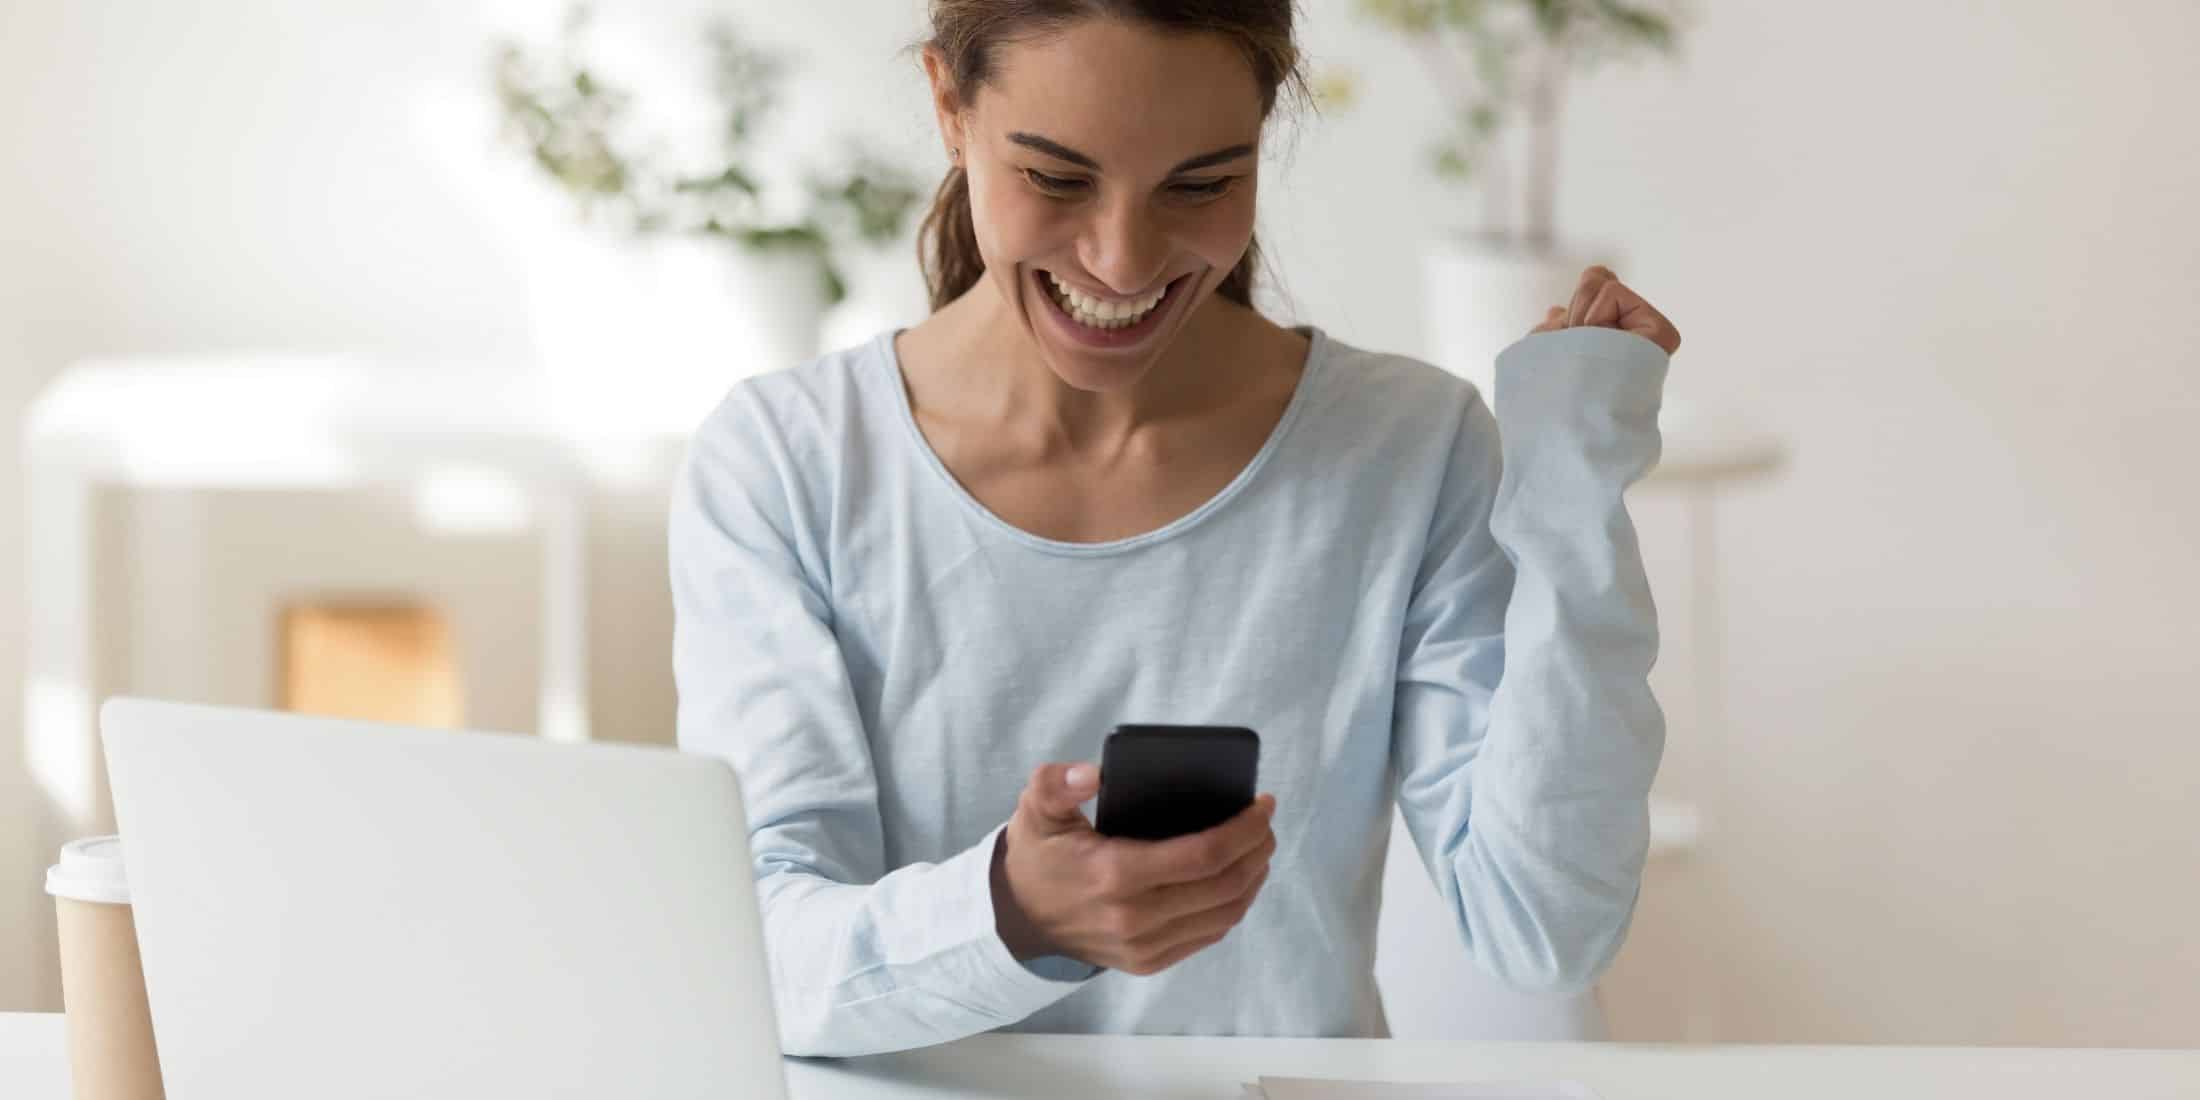 young woman smiling , looking down at mobile device she is holding in one hand. white computer open in front of woman and white walls behind her